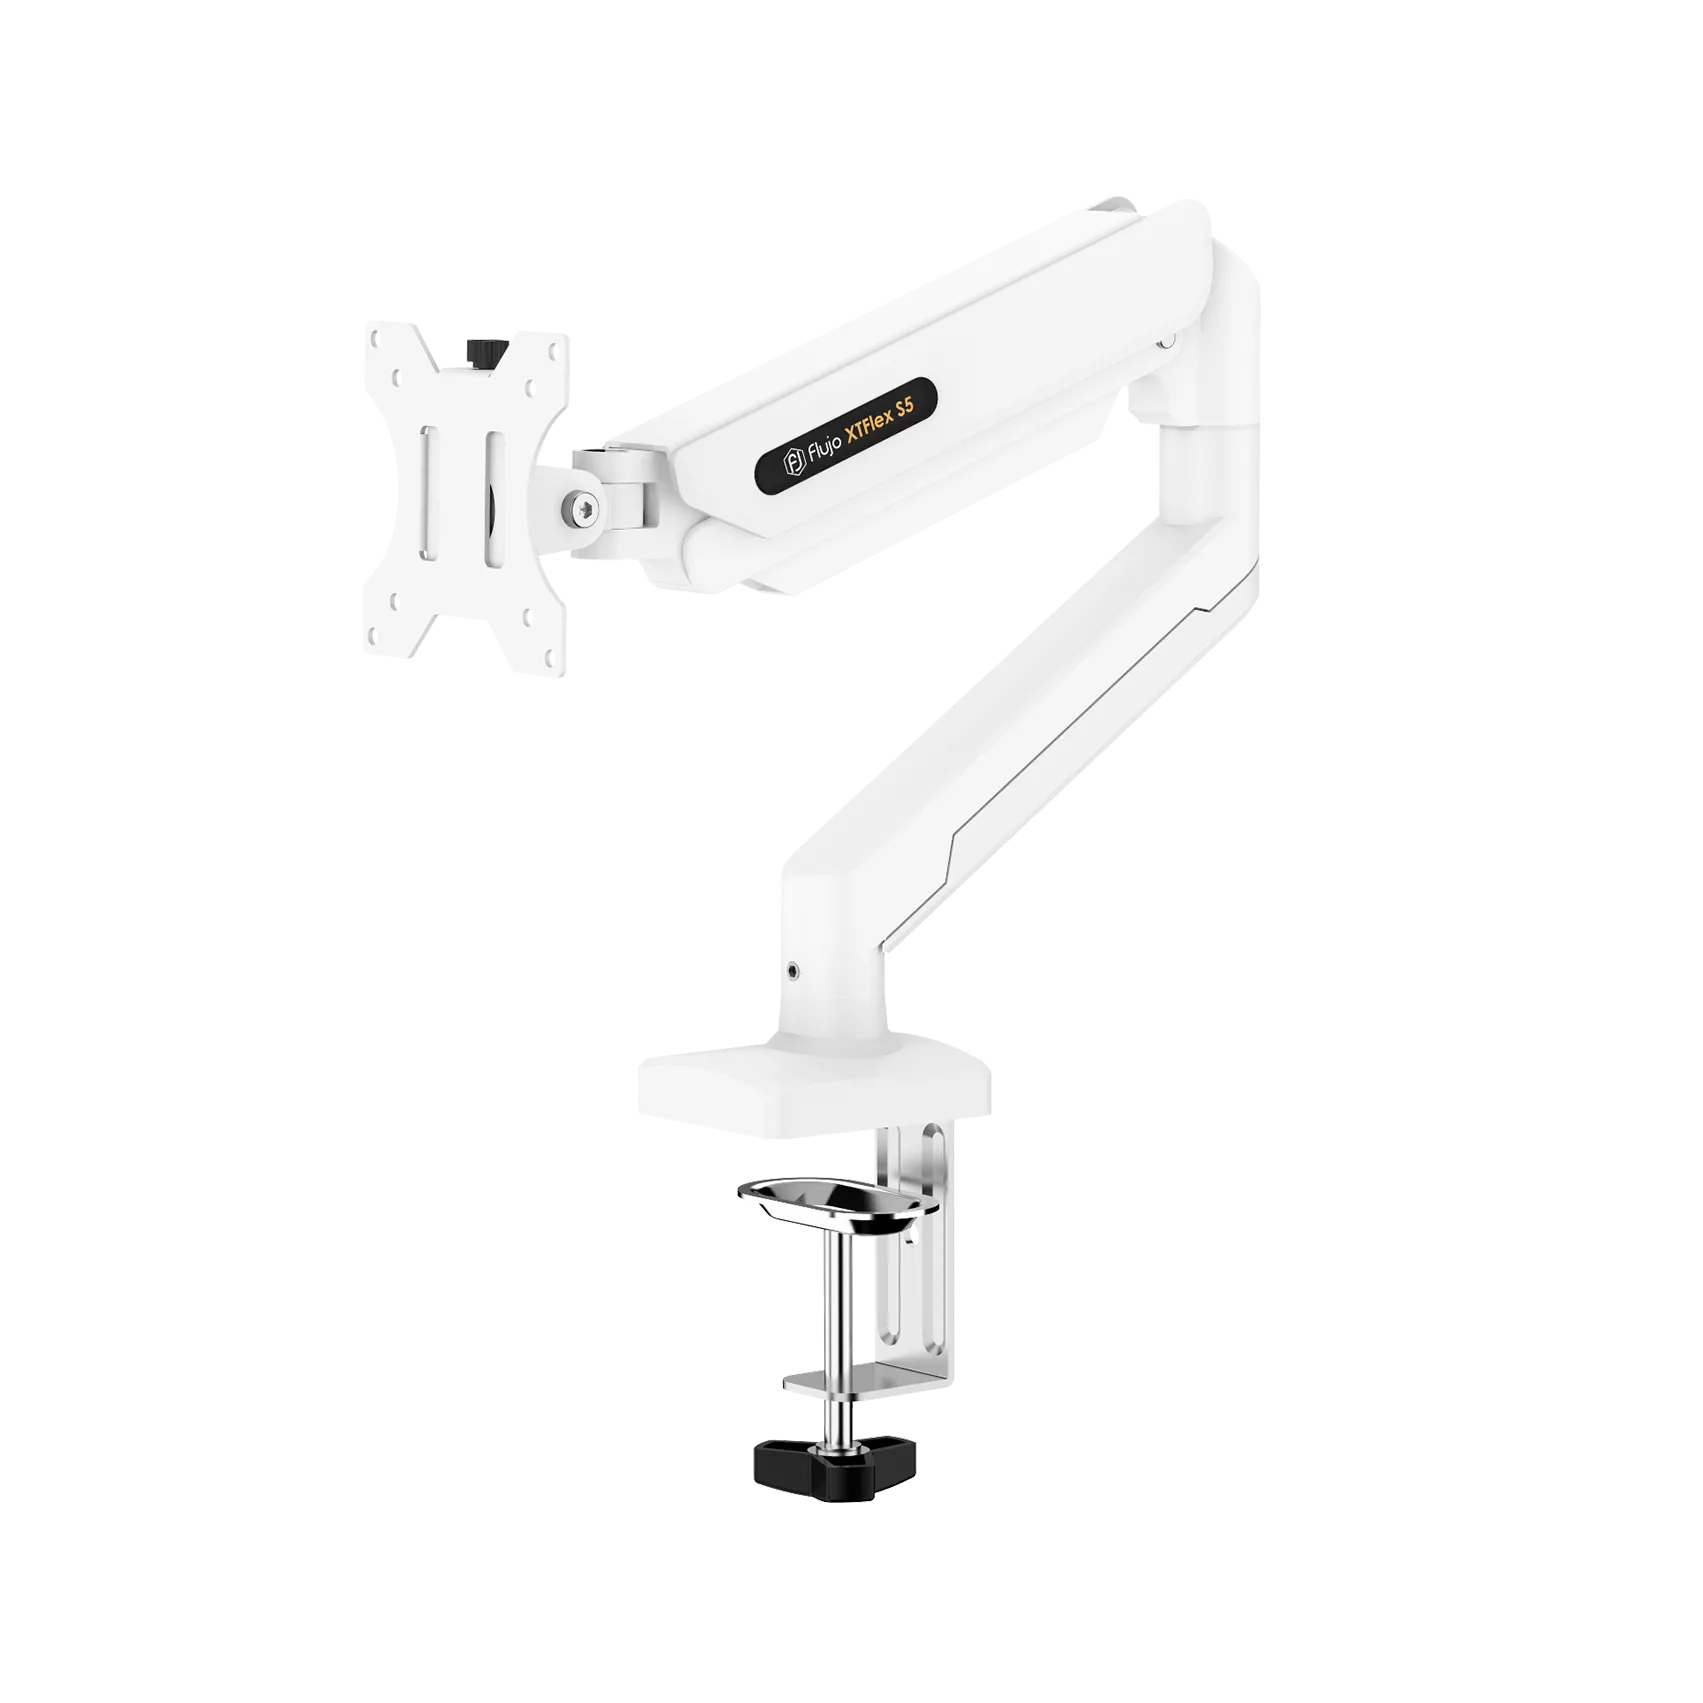 XTFlex S5 Monitor Arm in White, an adjustable and sturdy solution for ergonomic monitor positioning.